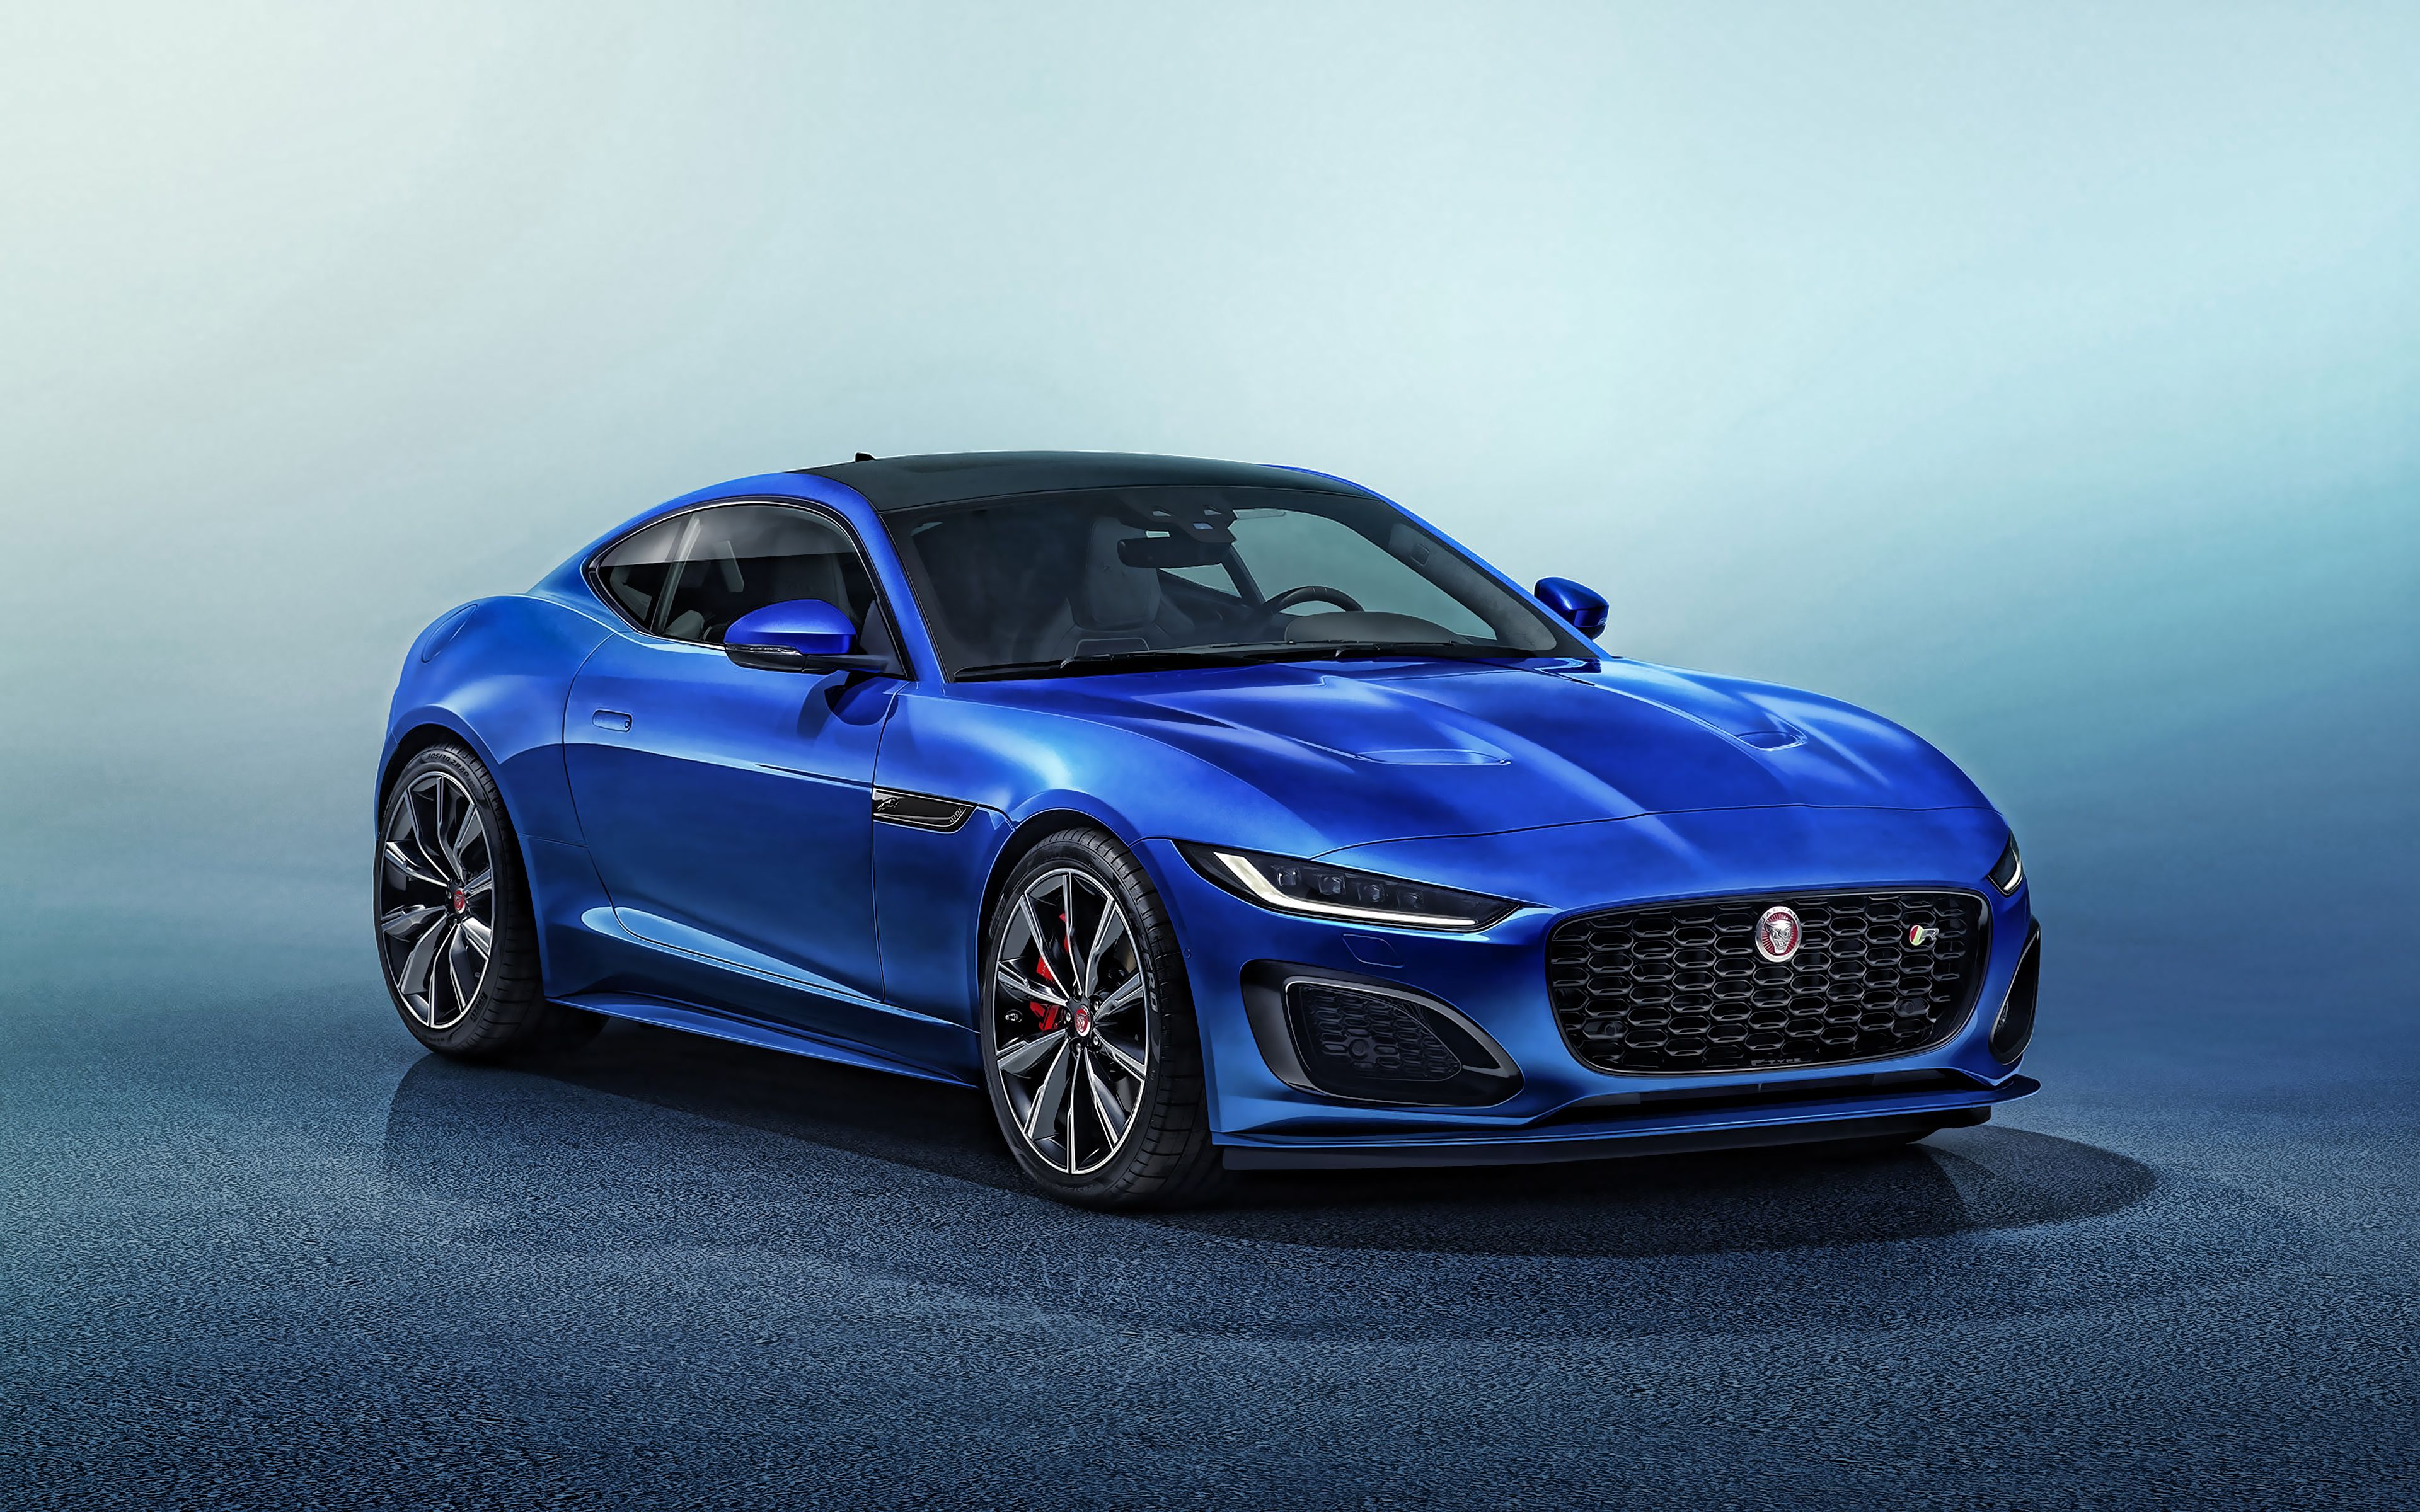 Download Wallpaper Jaguar F Type Coupe, 4K, Front View, Exterior, New Blue F Type Coupe, Blue Sports Coupe, British Sports Cars, Jaguar For Desktop With Resolution 3840x2400. High Quality HD Picture Wallpaper